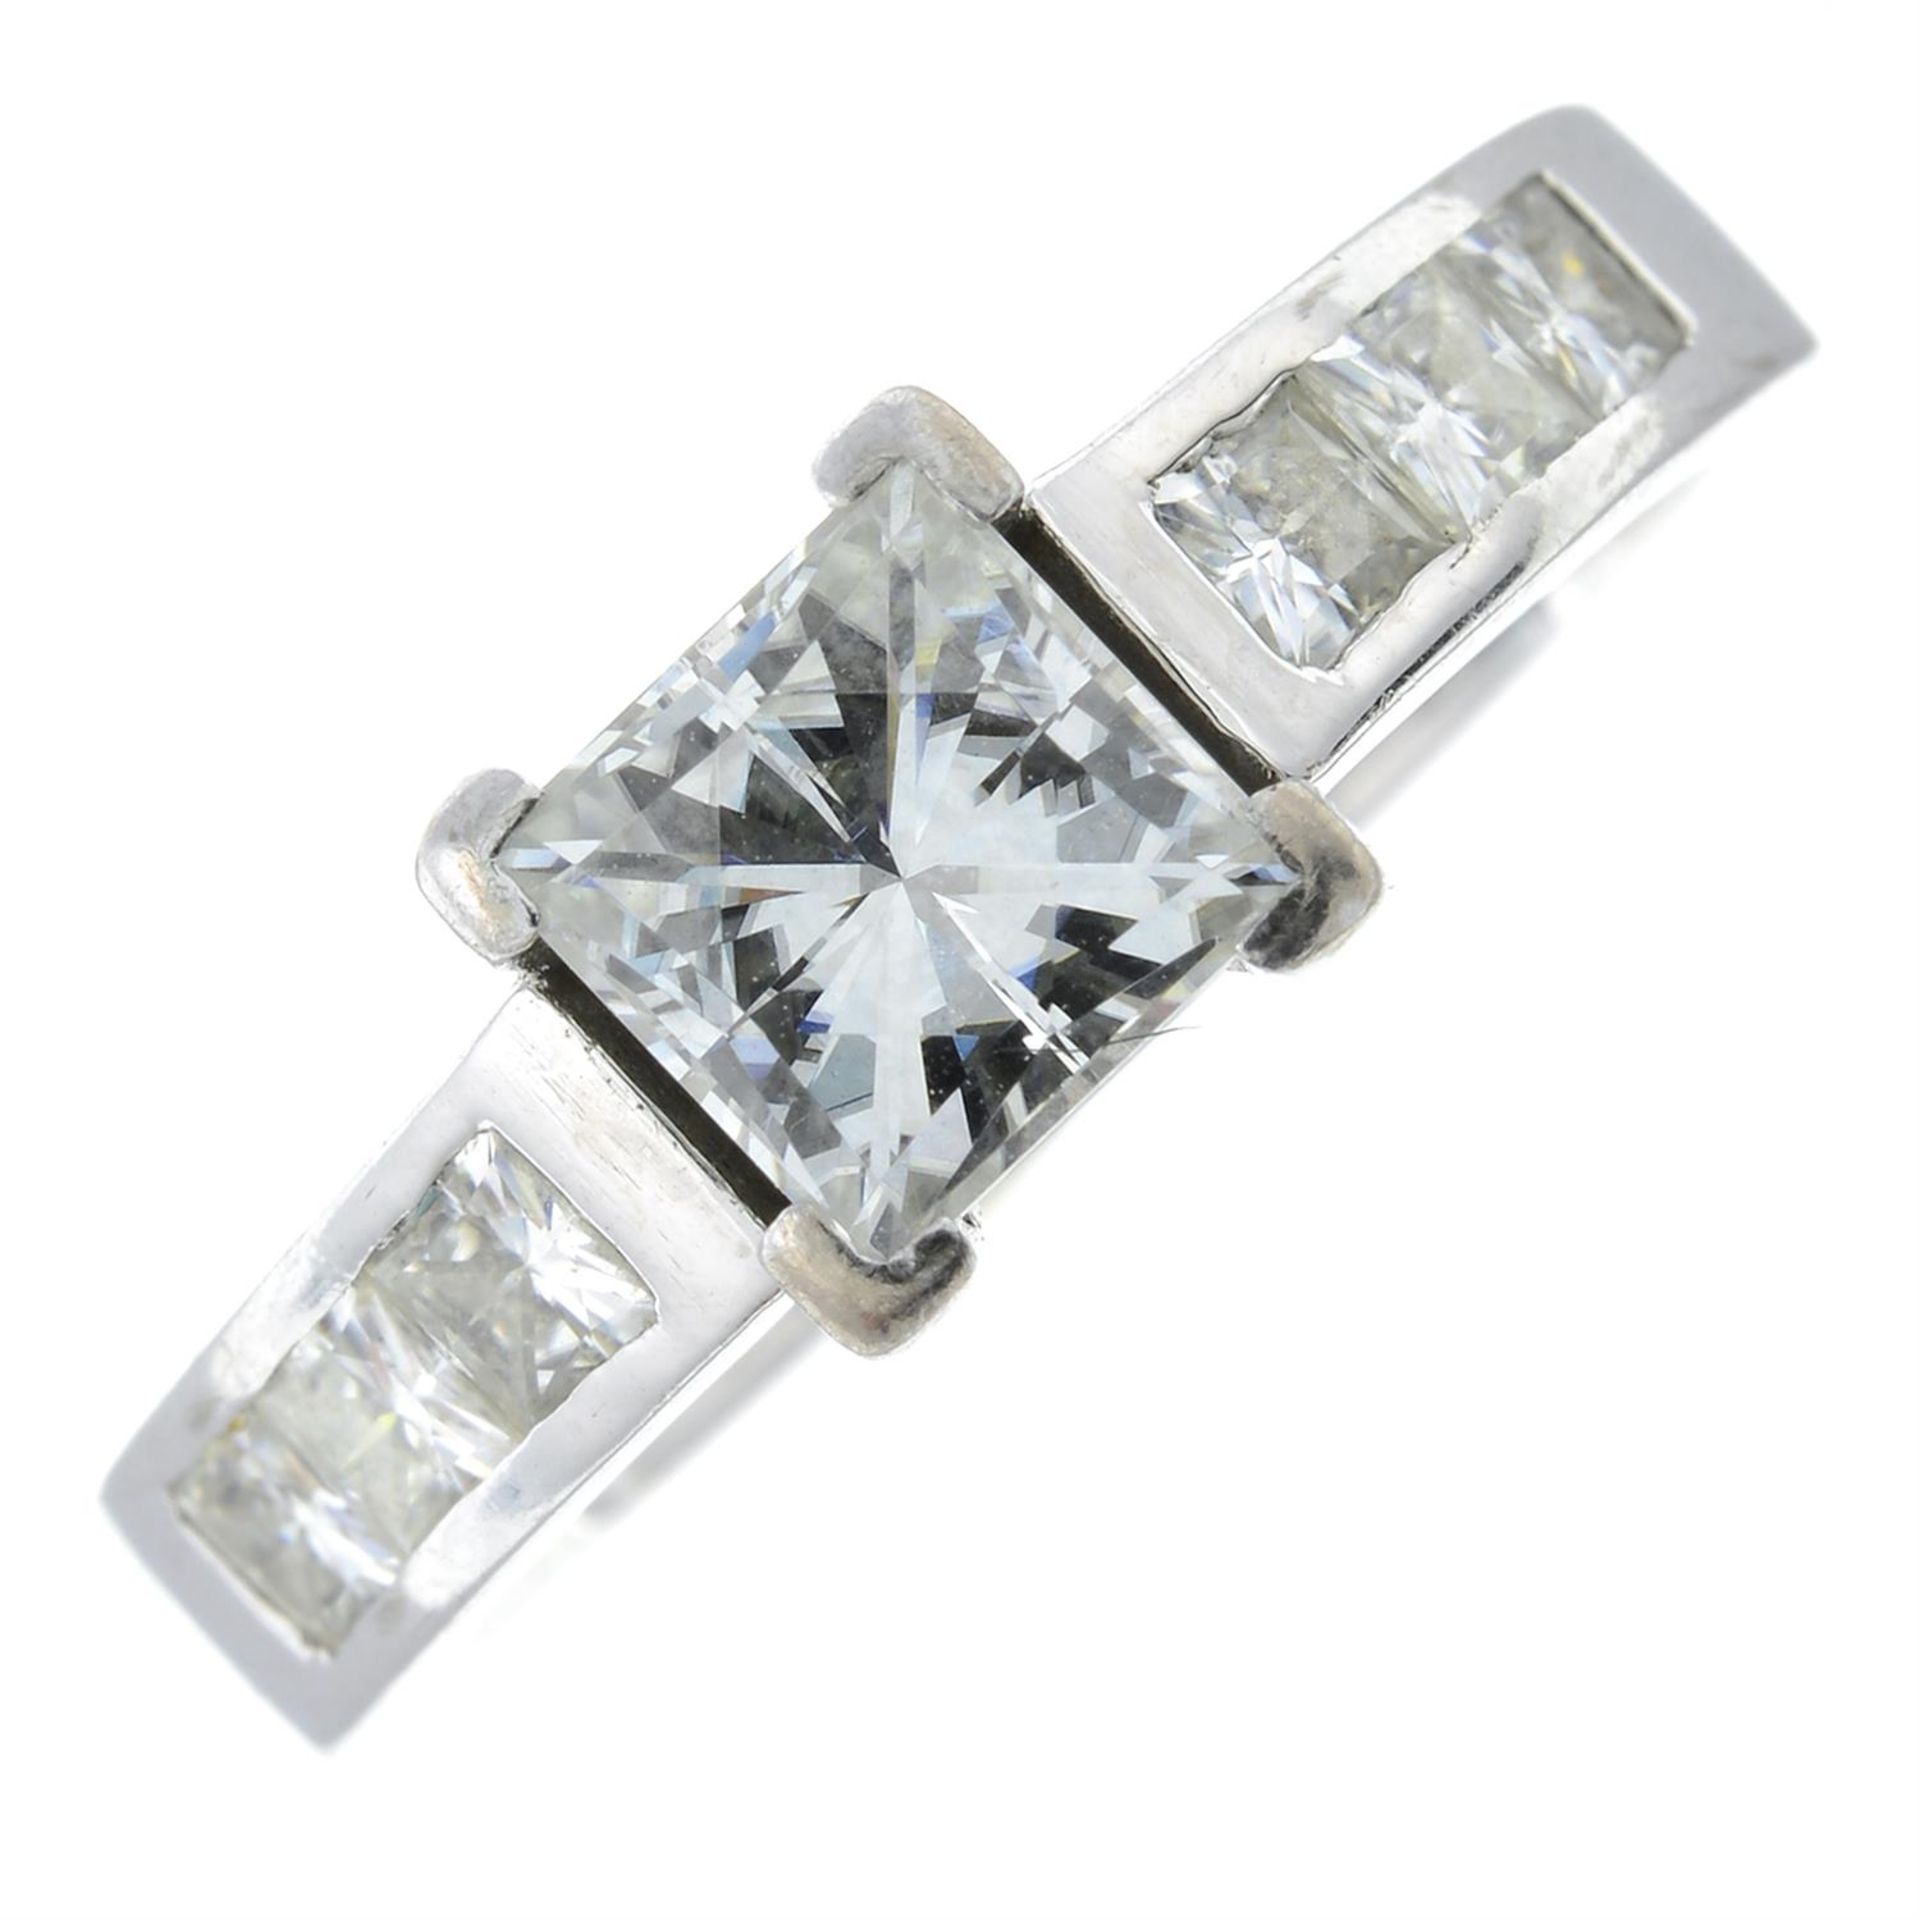 An 18ct gold synthetic moissanite ring.